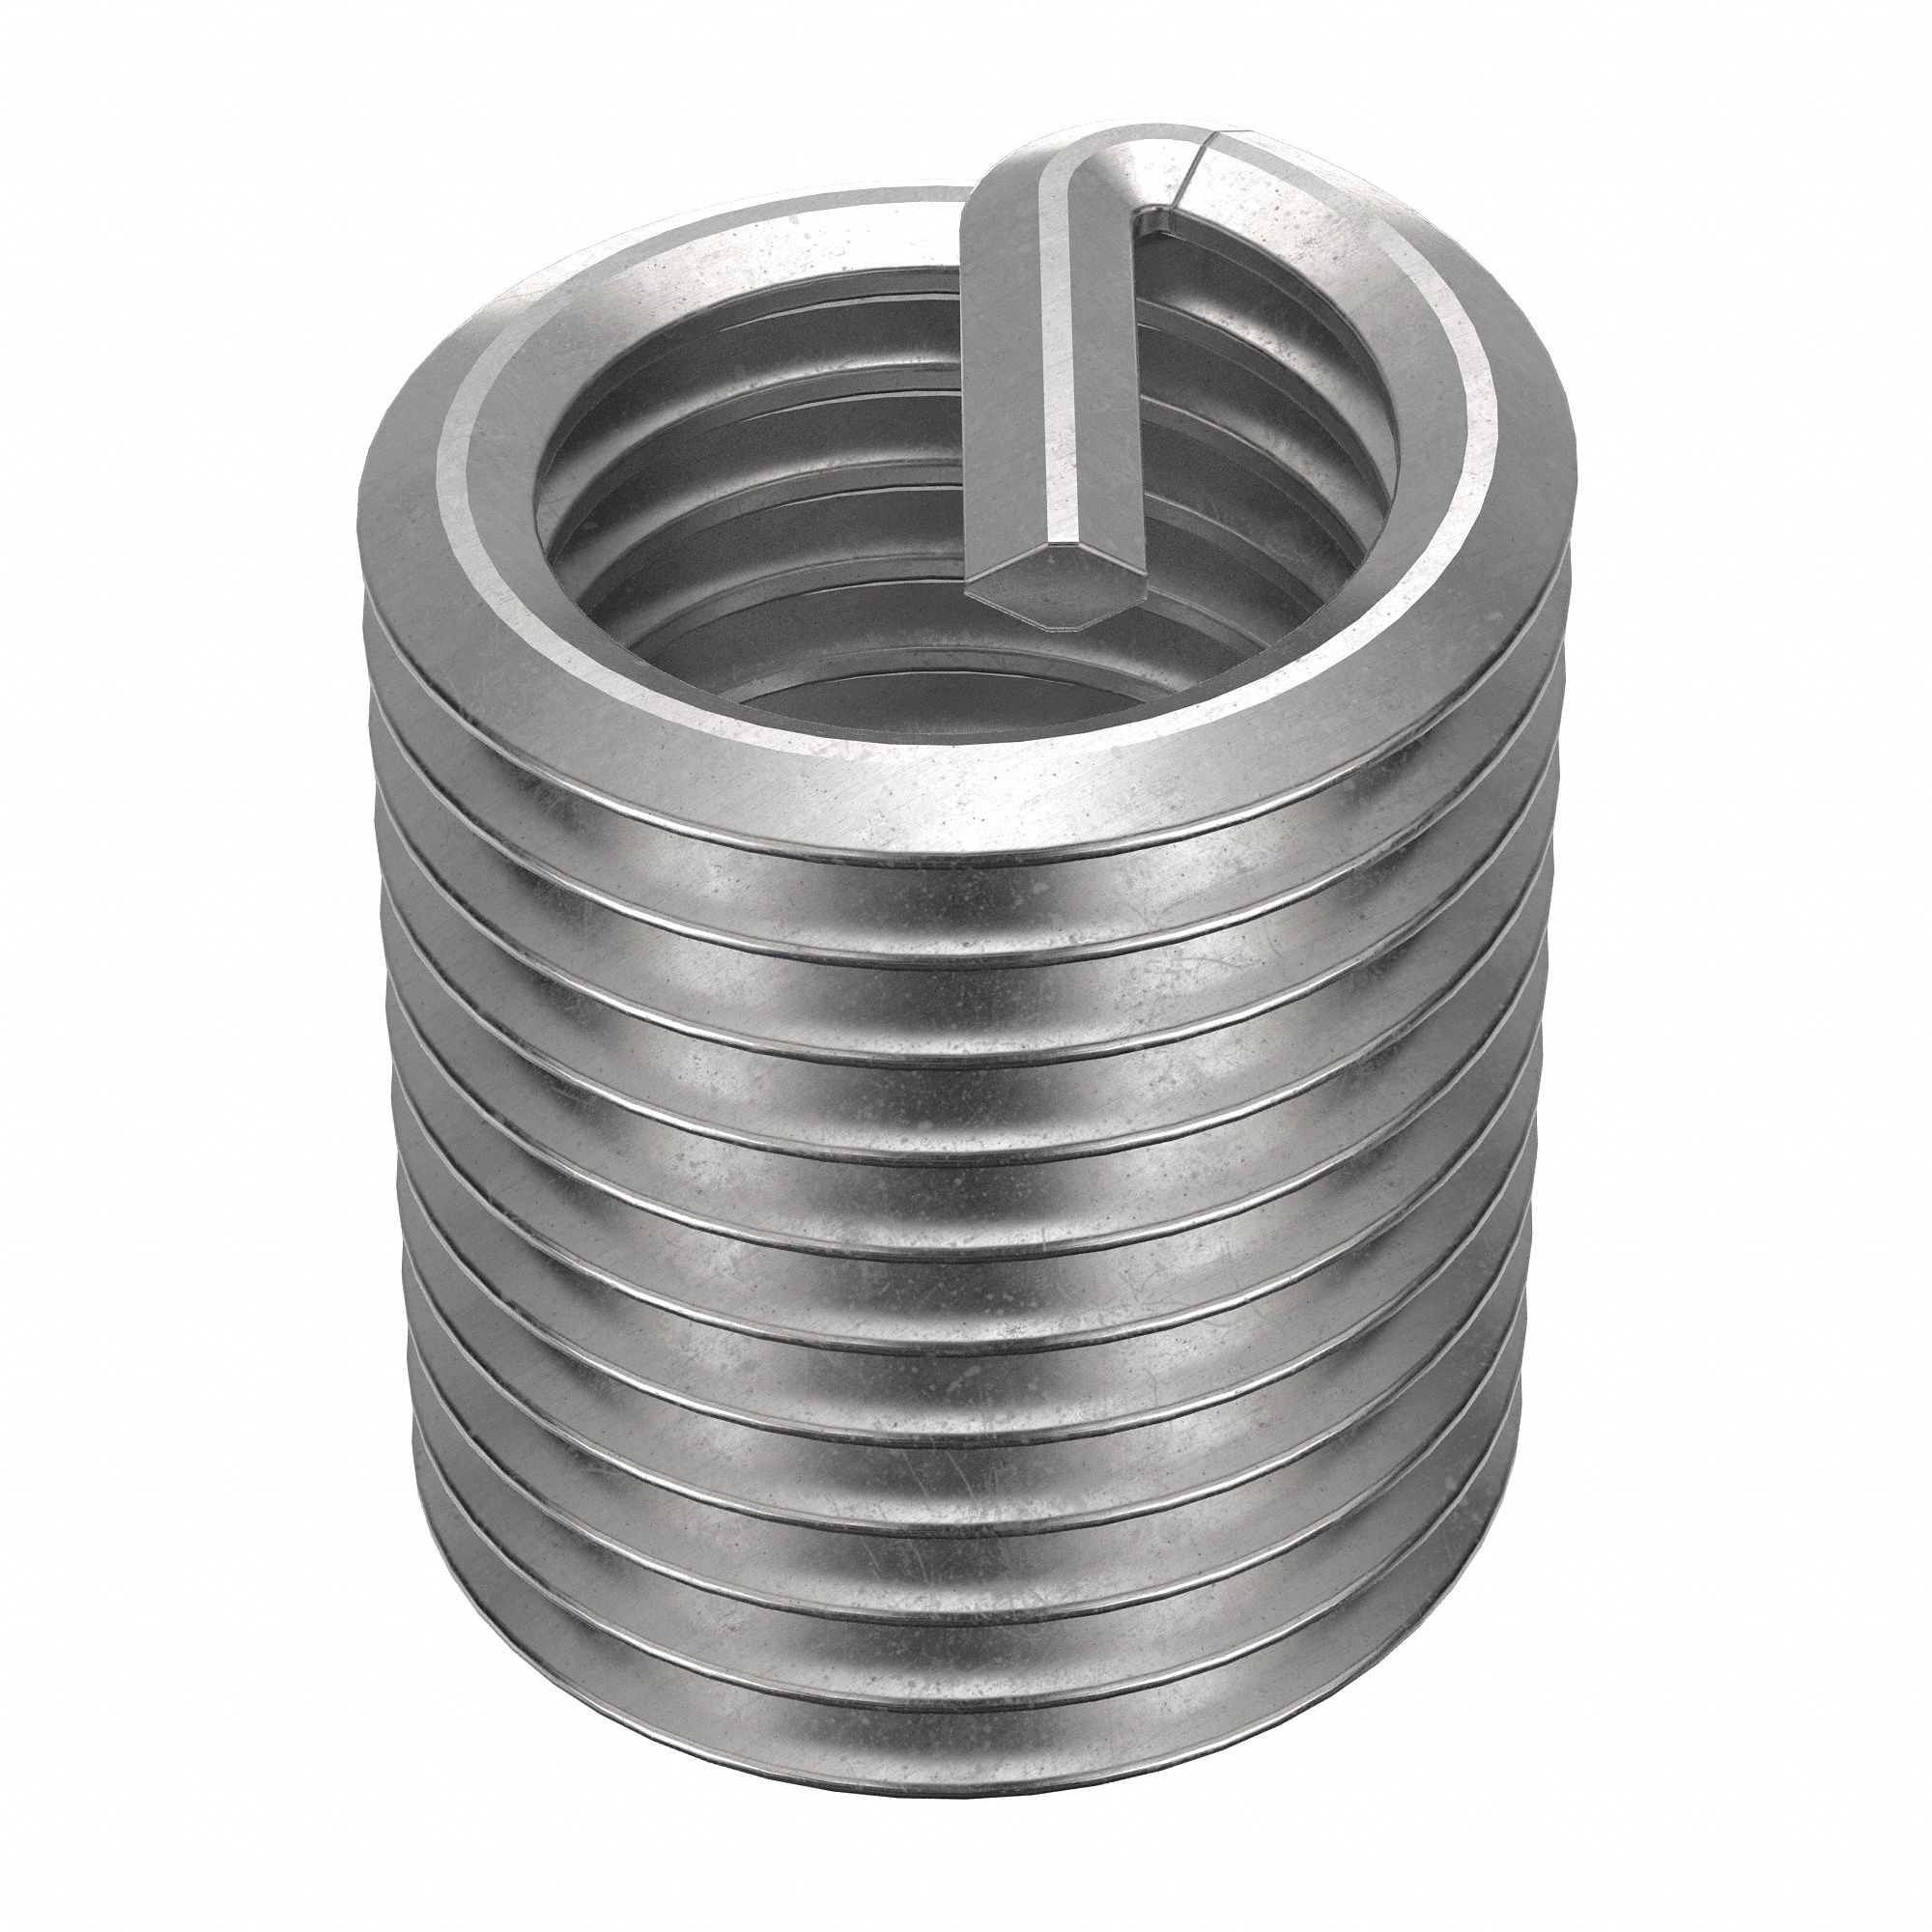 Stainless Steel Helicoil Thread Insert 1/2-13 x 1 Diameter Qty-25 